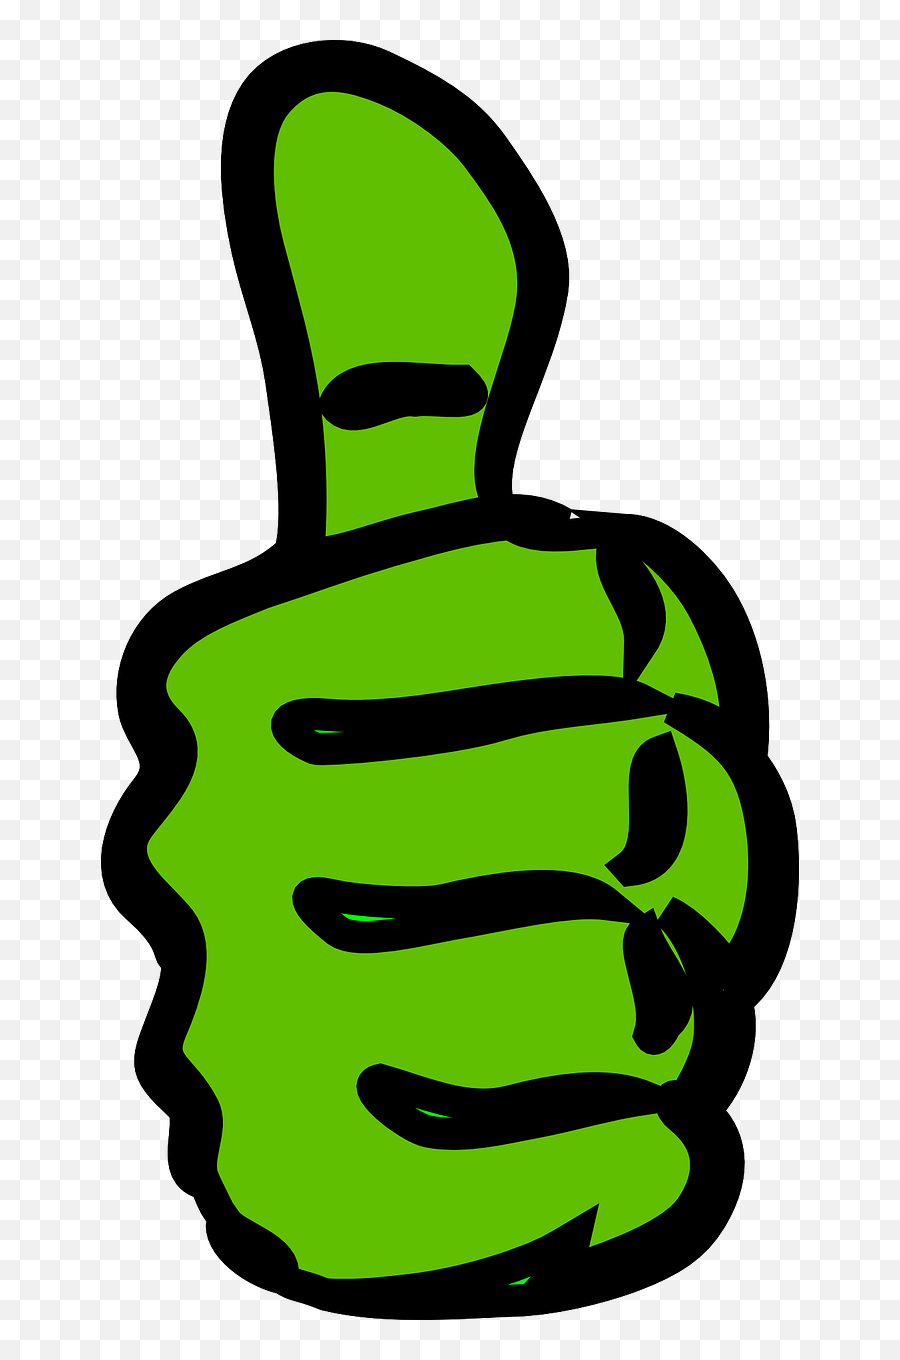 Free Photo Thumb Like Okay Thumbs Go Up Green Confirm - Max Vector Transparent Thumbs Up Emoji,Emoticons Frozen Snowman On Facebook